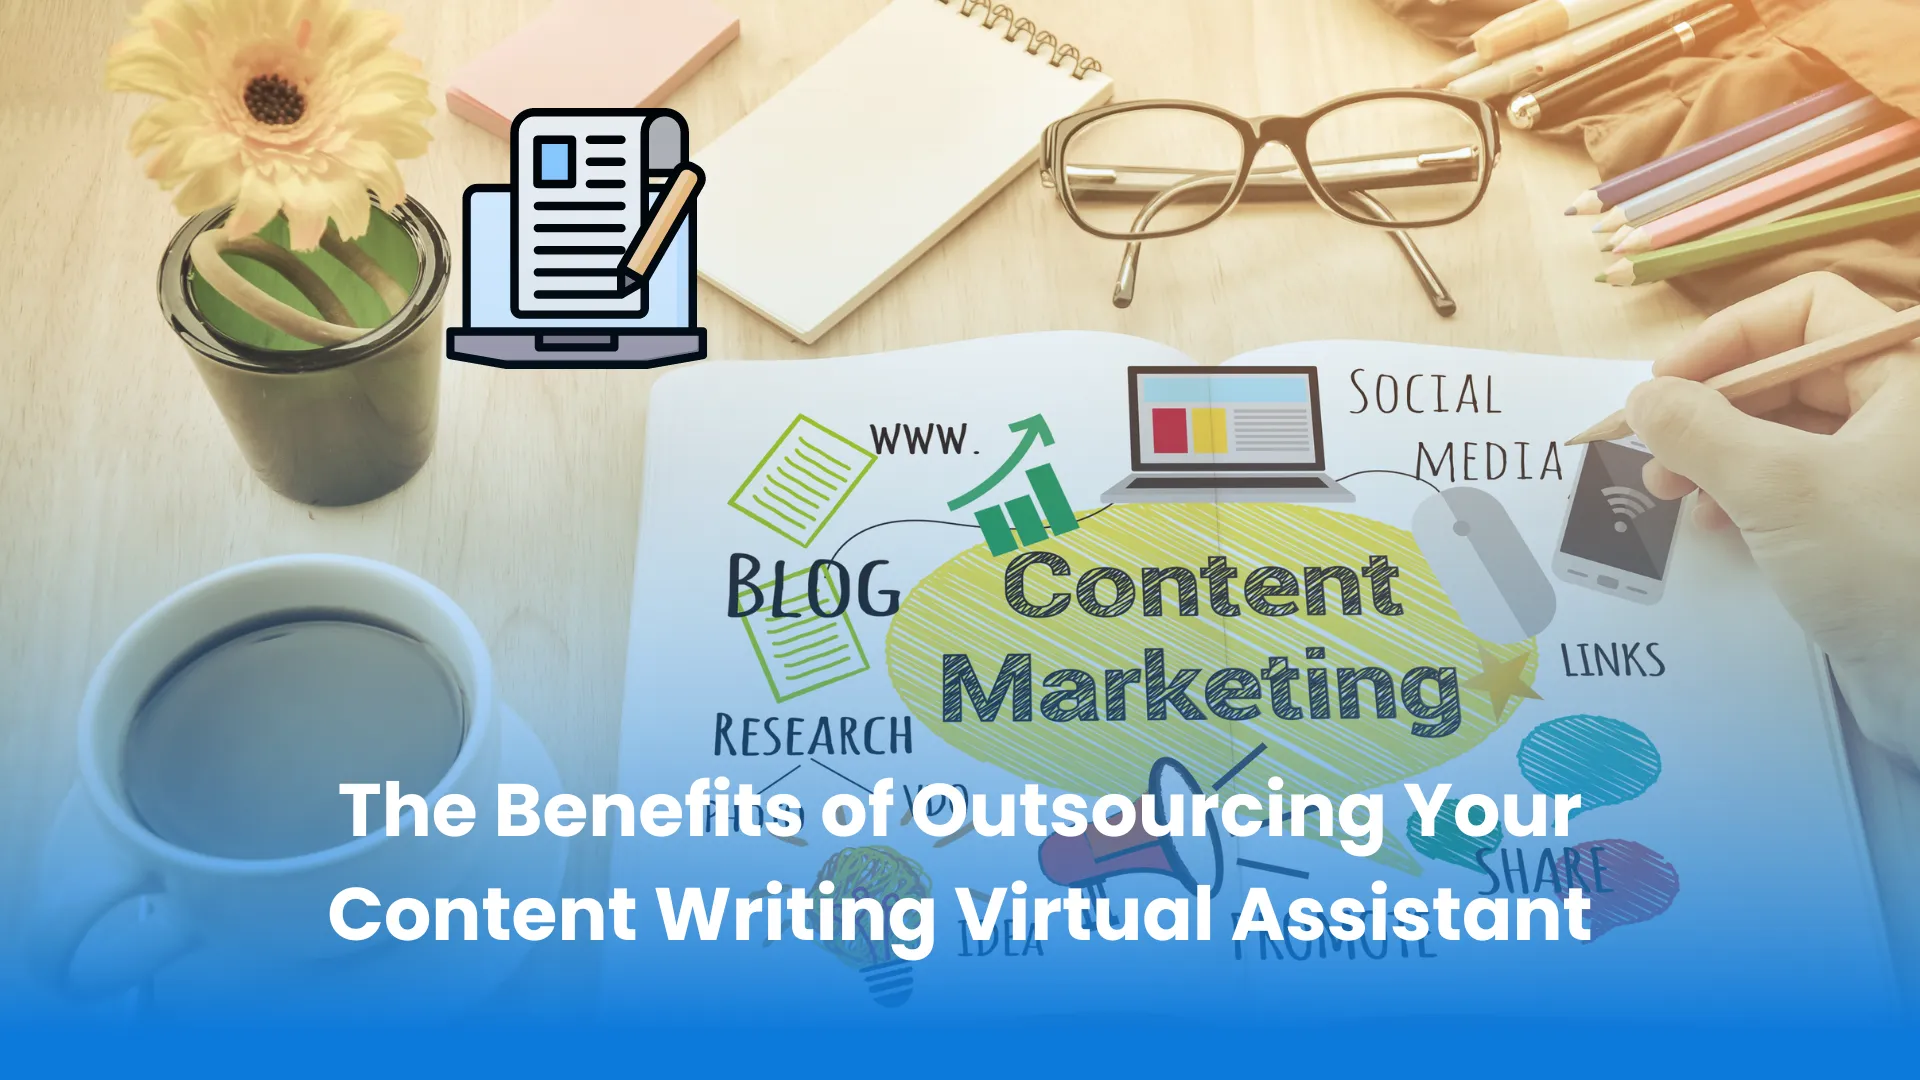 The Benefits of Outsourcing Your Content Writing Virtual Assistant